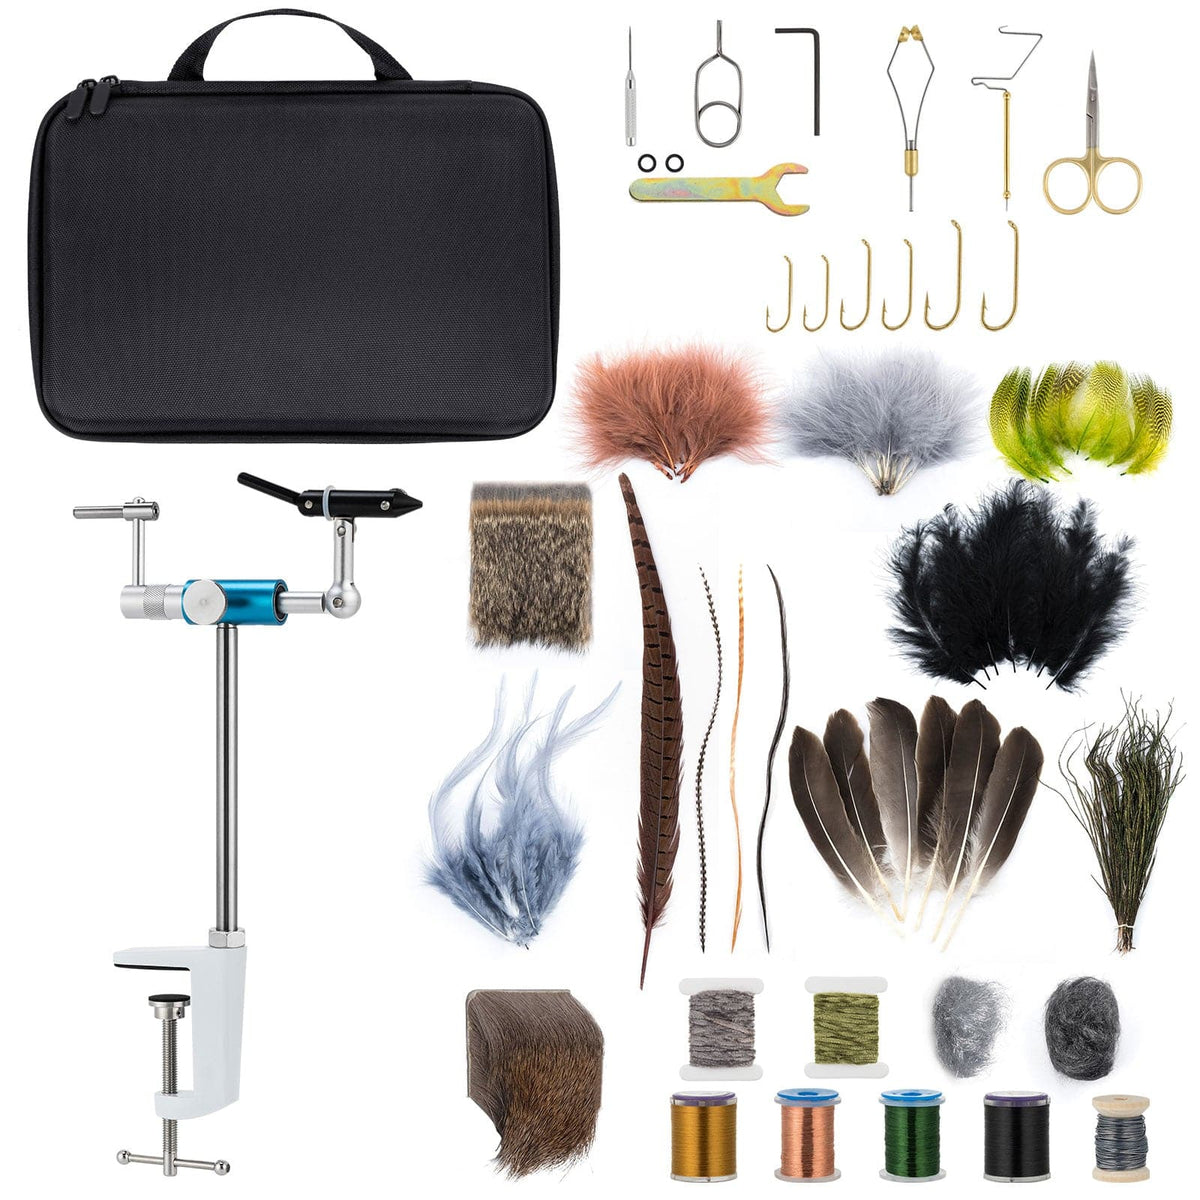 2024 Happy New Year: Fly Fishing Flies Tying Vise & Materials Full